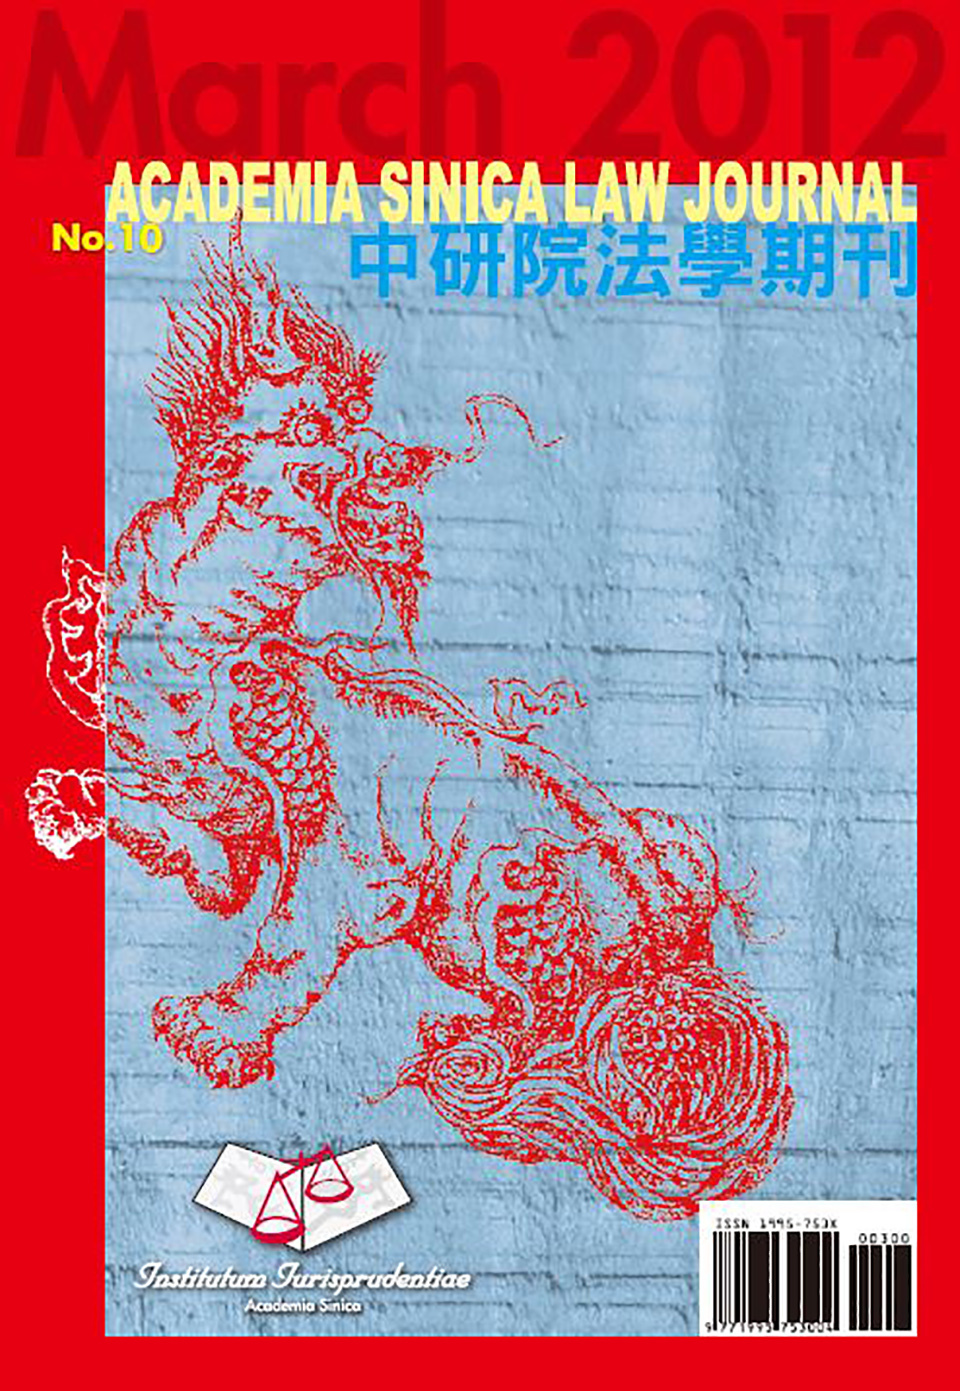 Issue No.10